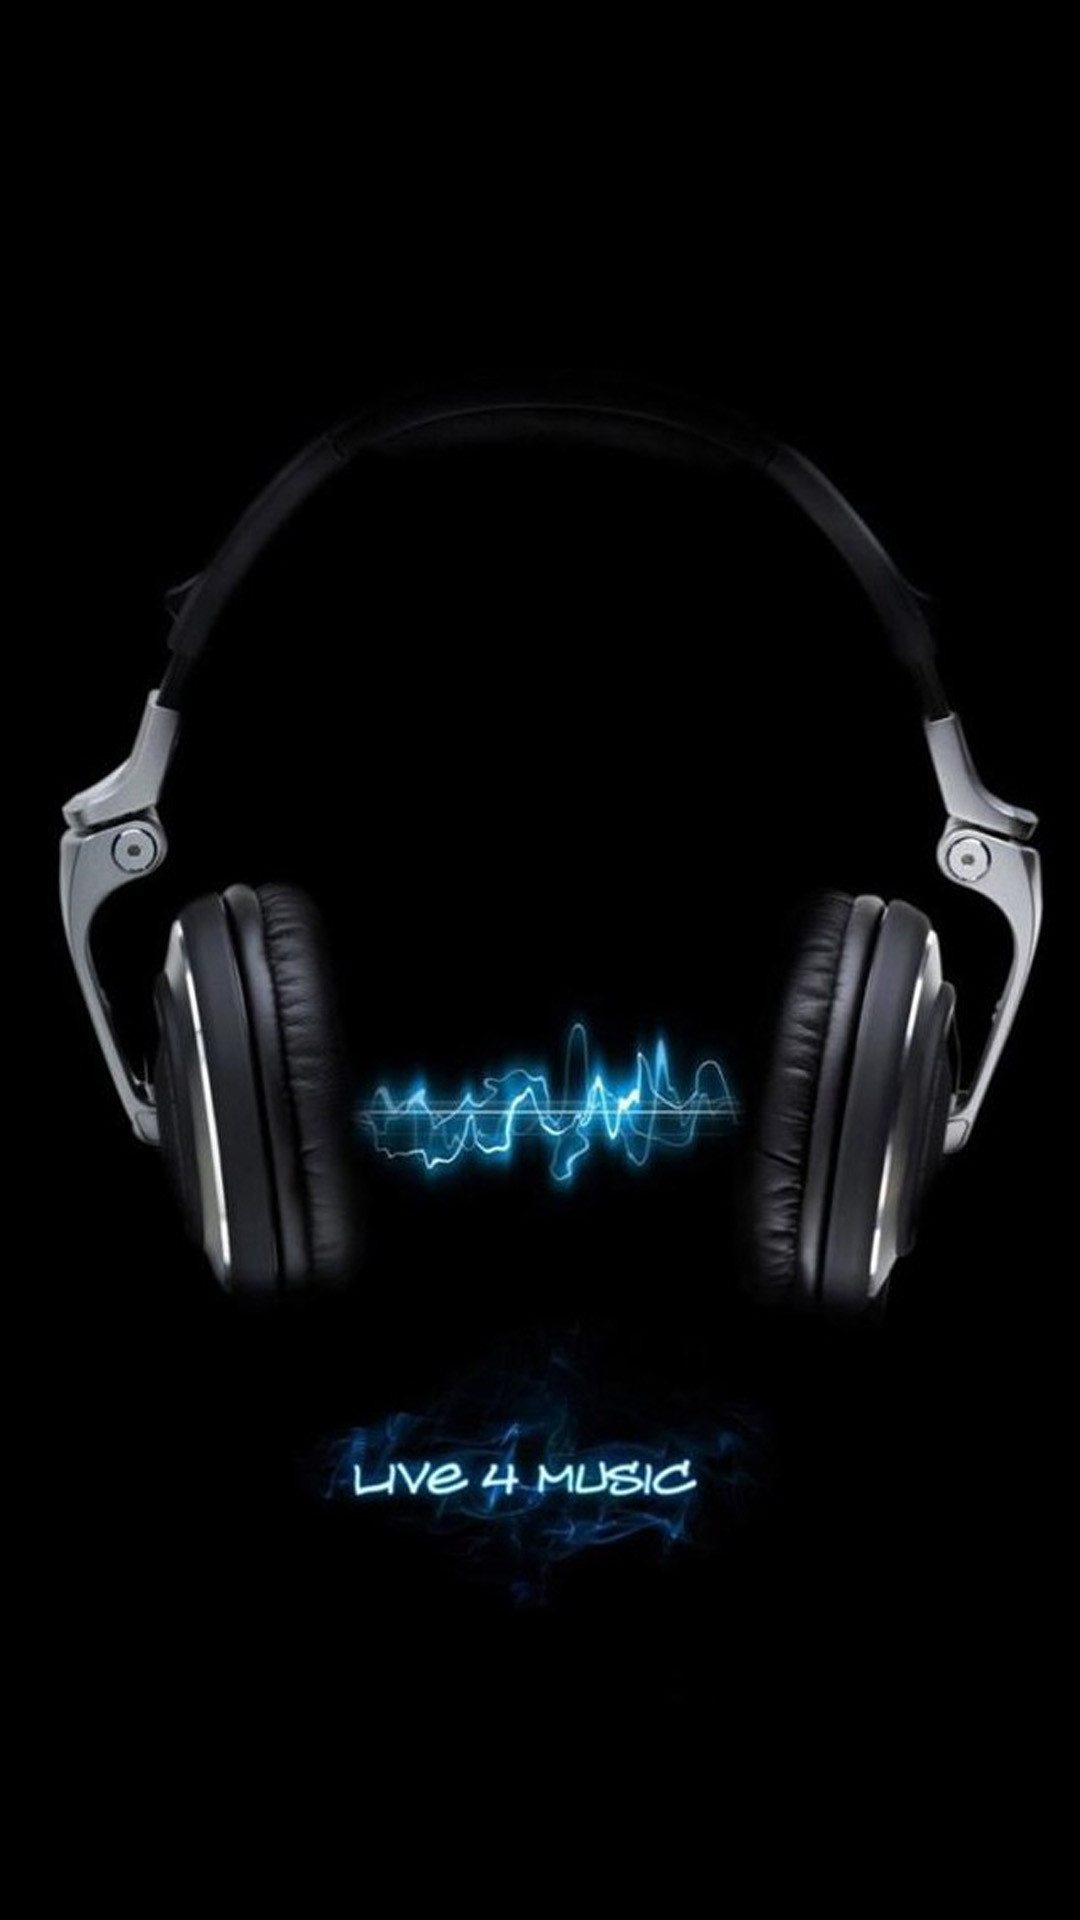 1080x1920 music-live-4-music-3Wallpapers-iPhone-Parallax